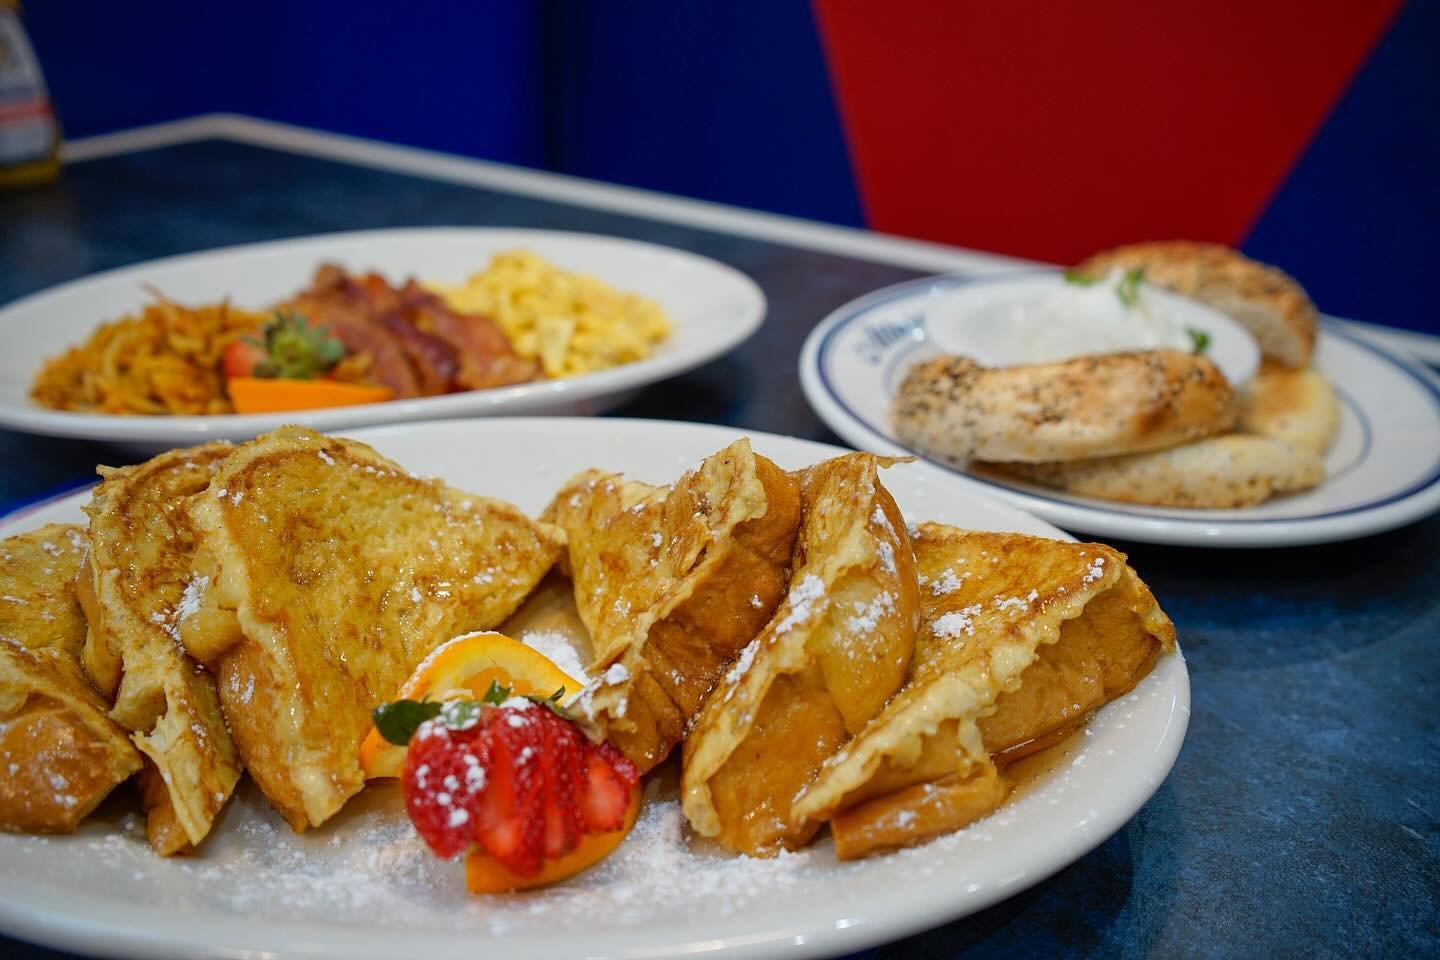 Celebrate Mom this Sunday with a special brunch at @attmansharborpoint 🥞🍳

Enjoy their signature brunch buffet featuring an omelet and waffle station, bottomless mimosas, and more! 

Call to make your reservation, Mom will be sure to thank you 😉

